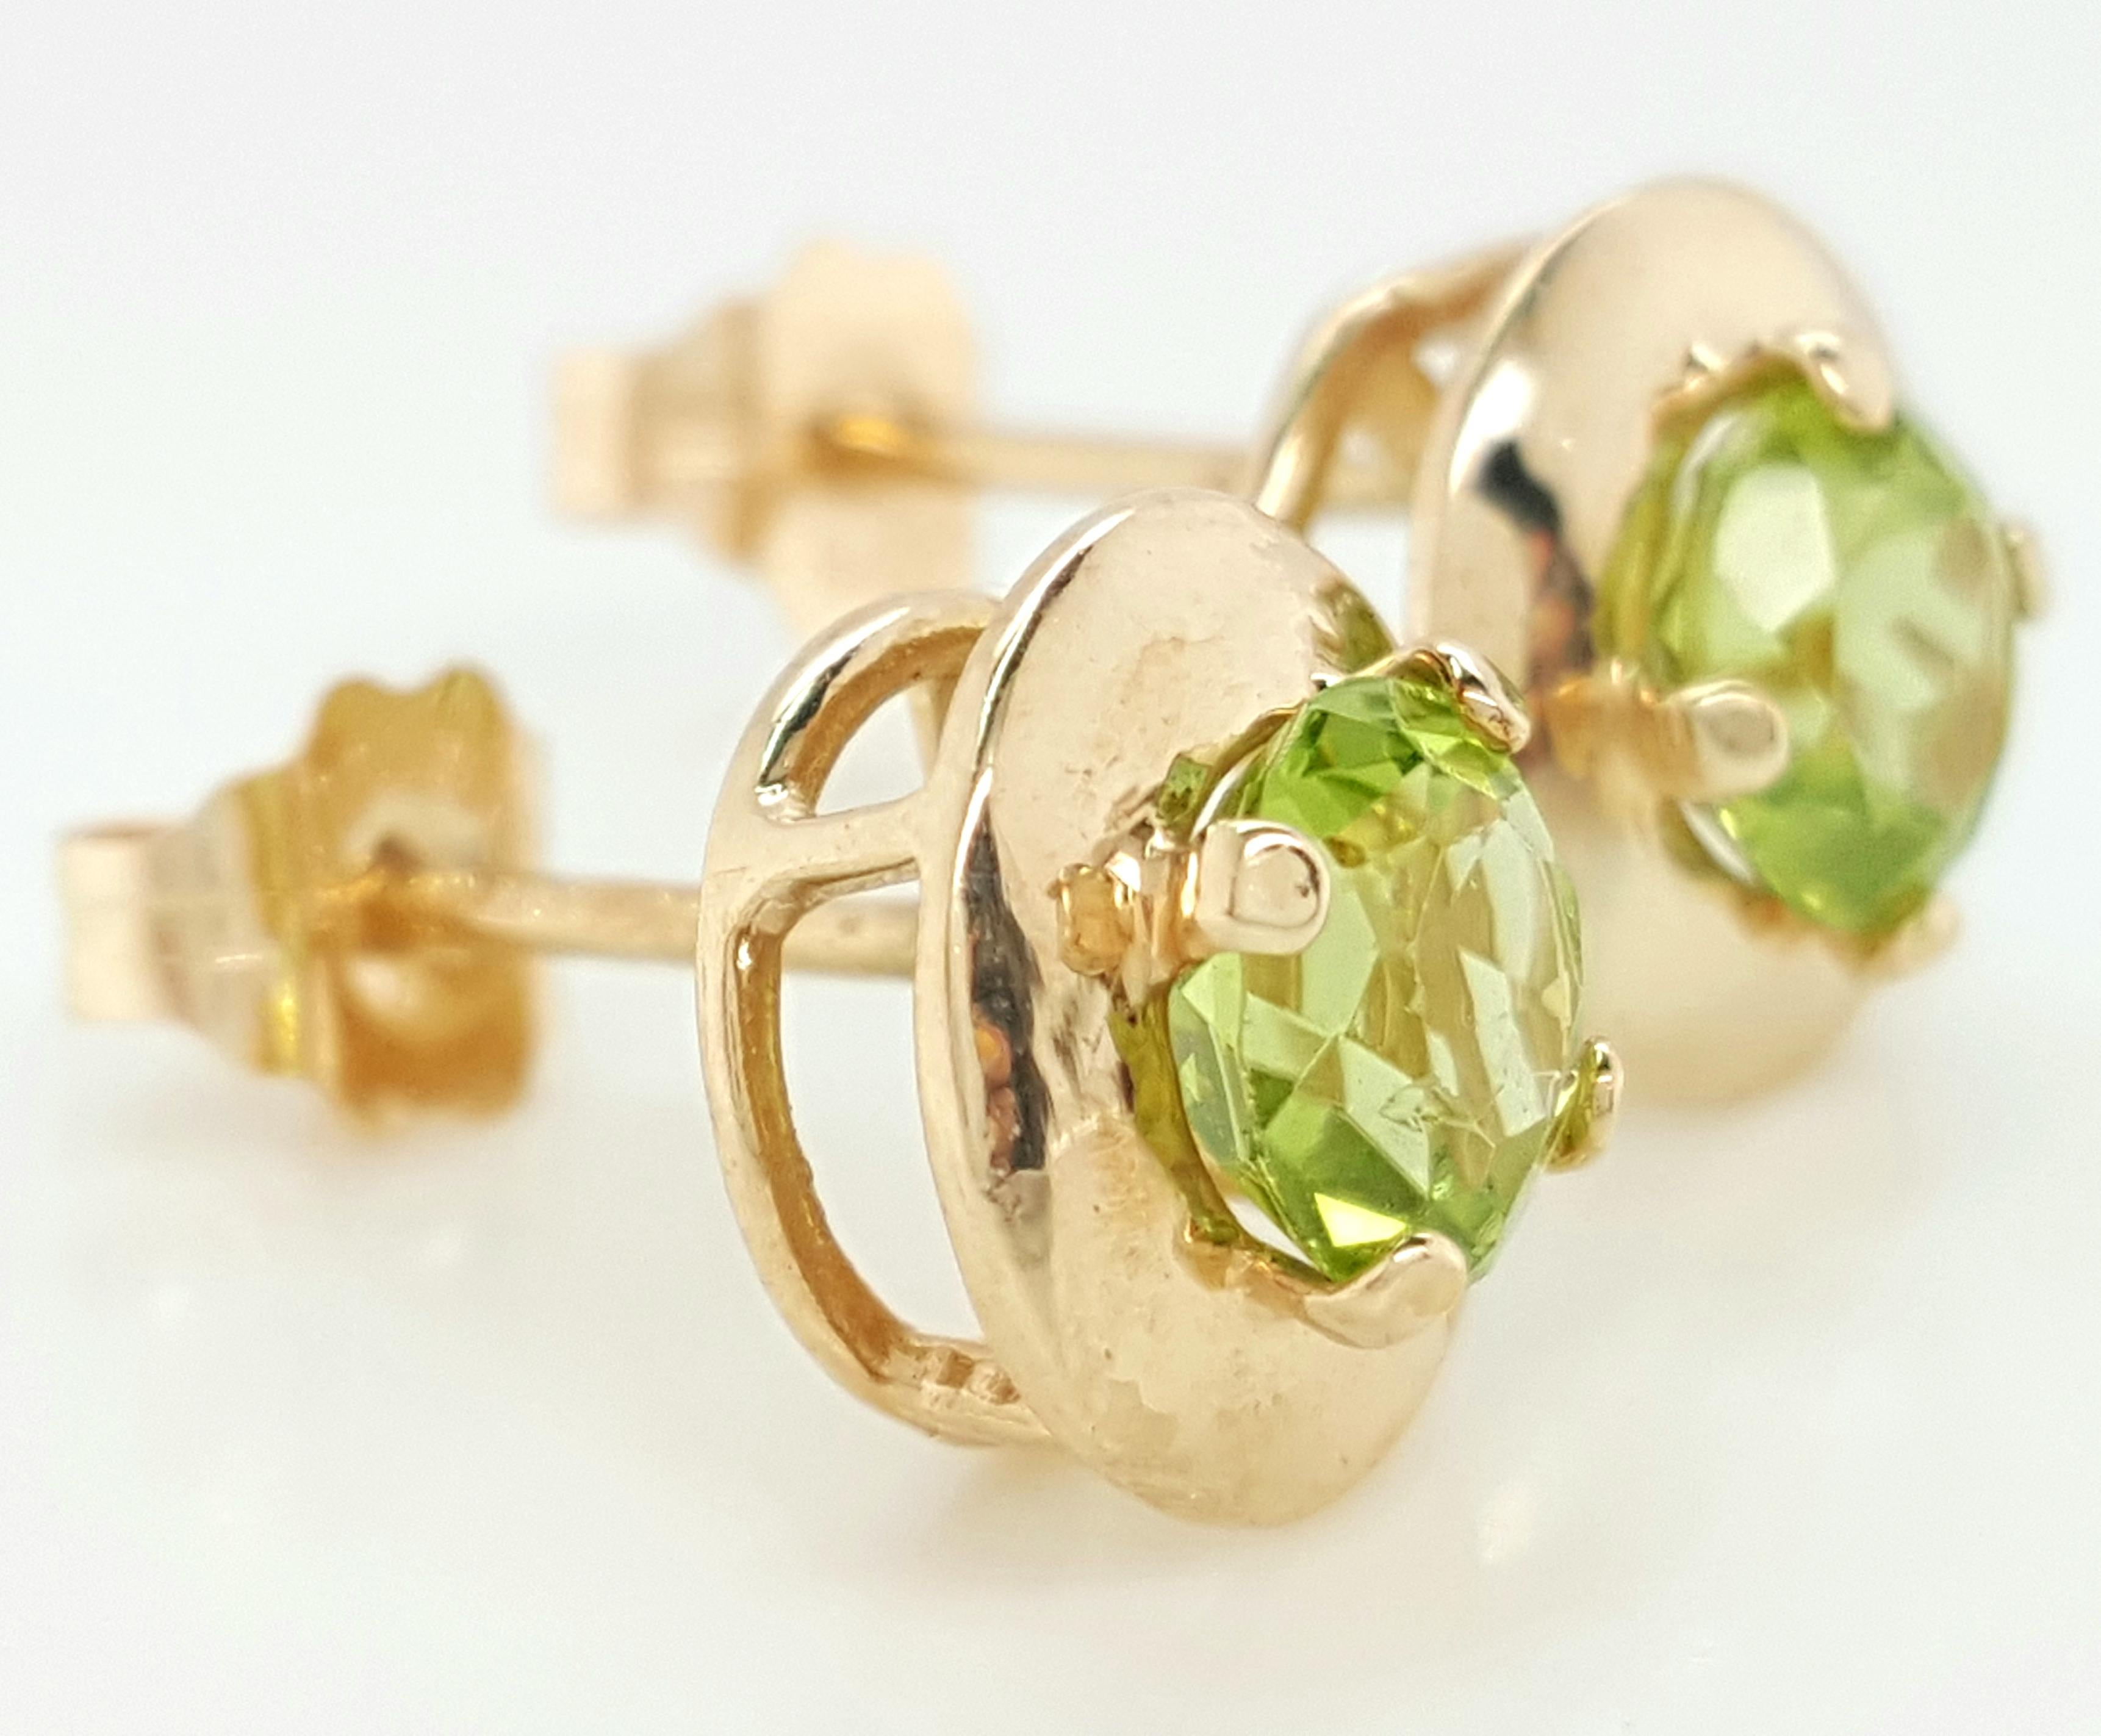 14K Yellow Gold Round Peridot Stud Earrings.  The earrings feature a matched pair of faceted round peridots weighing approximately  0.98 carats.  The peridots are each set into a 14 karat yellow gold four prong setting with a halo of gold, completed